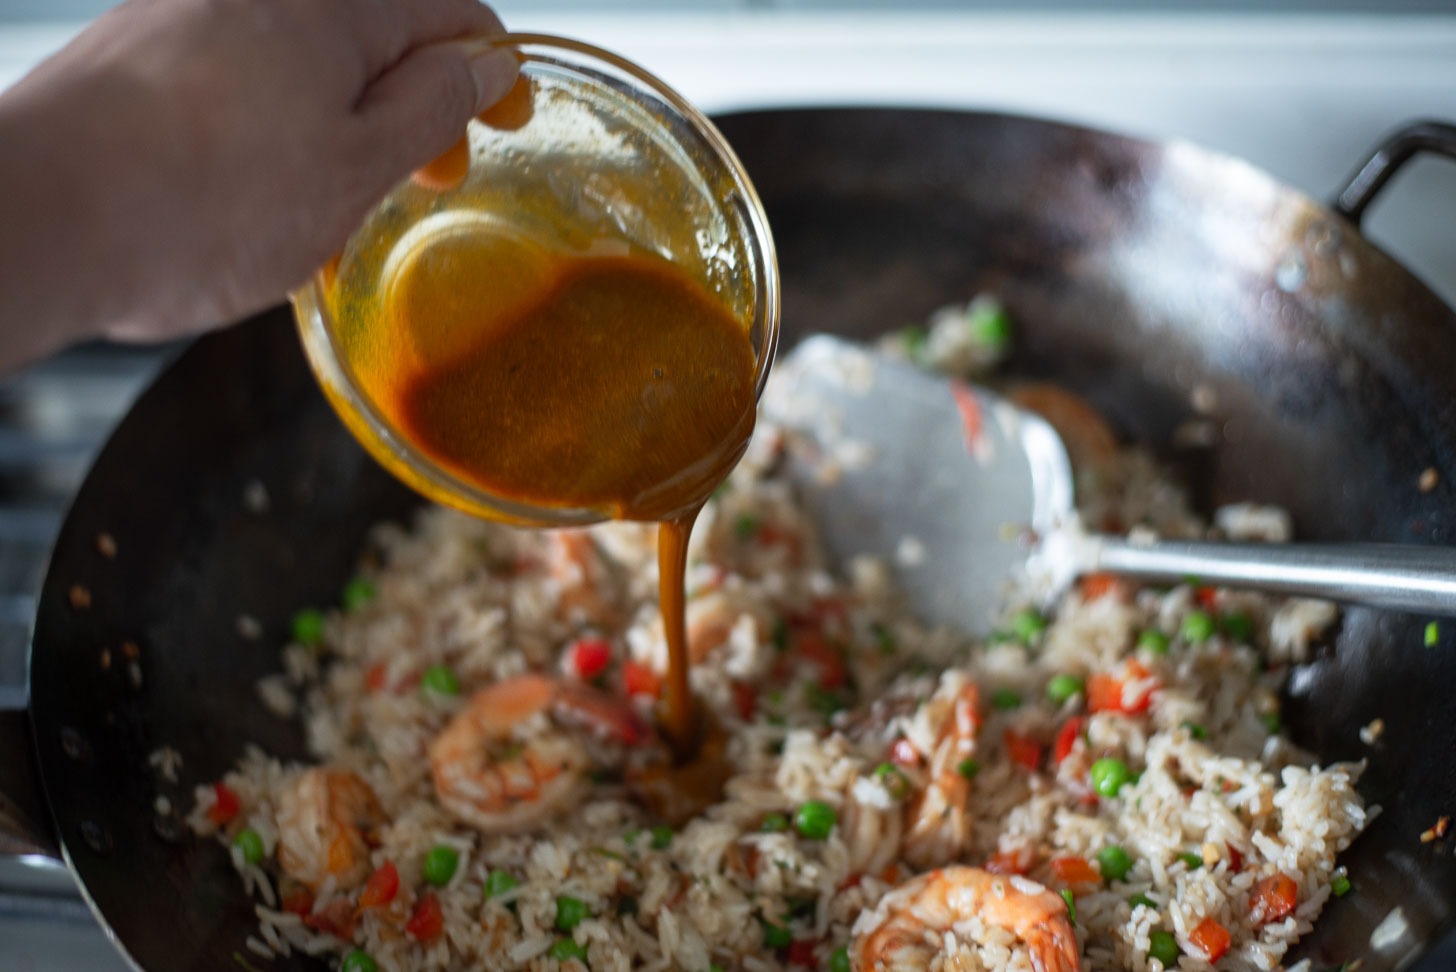 Pineapple fried rice sauce is added to the rice mixture to season.